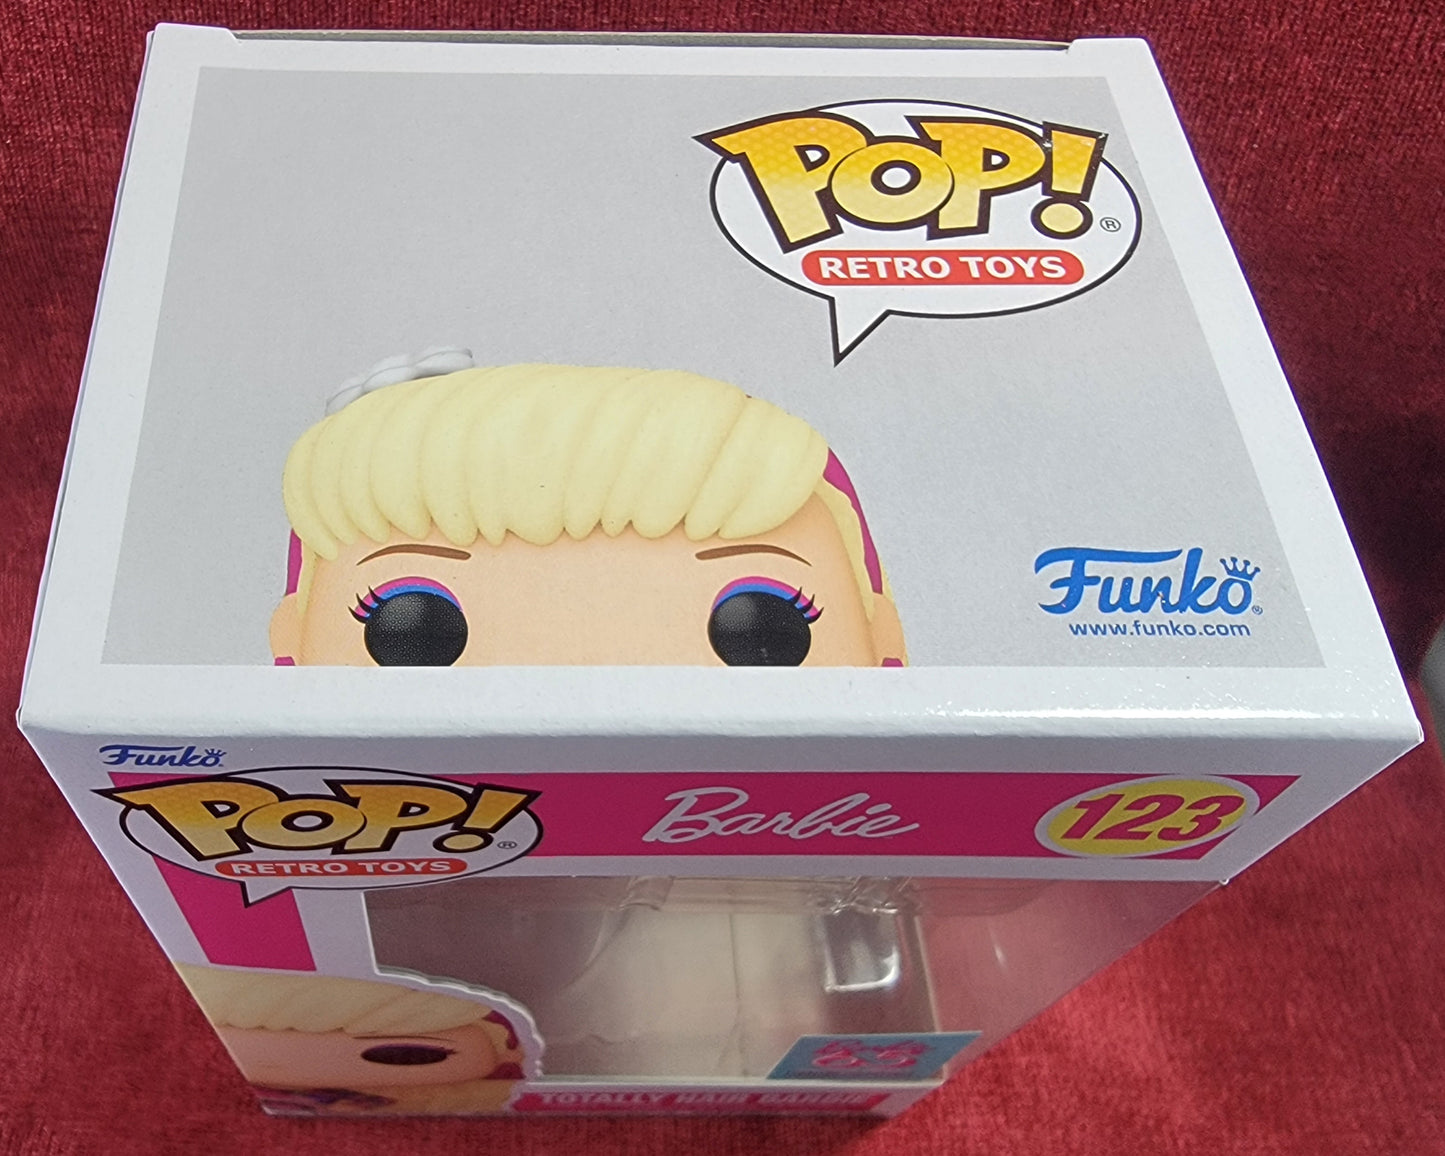 Totally hair barbie funko # 123 (nib)
With pop protector